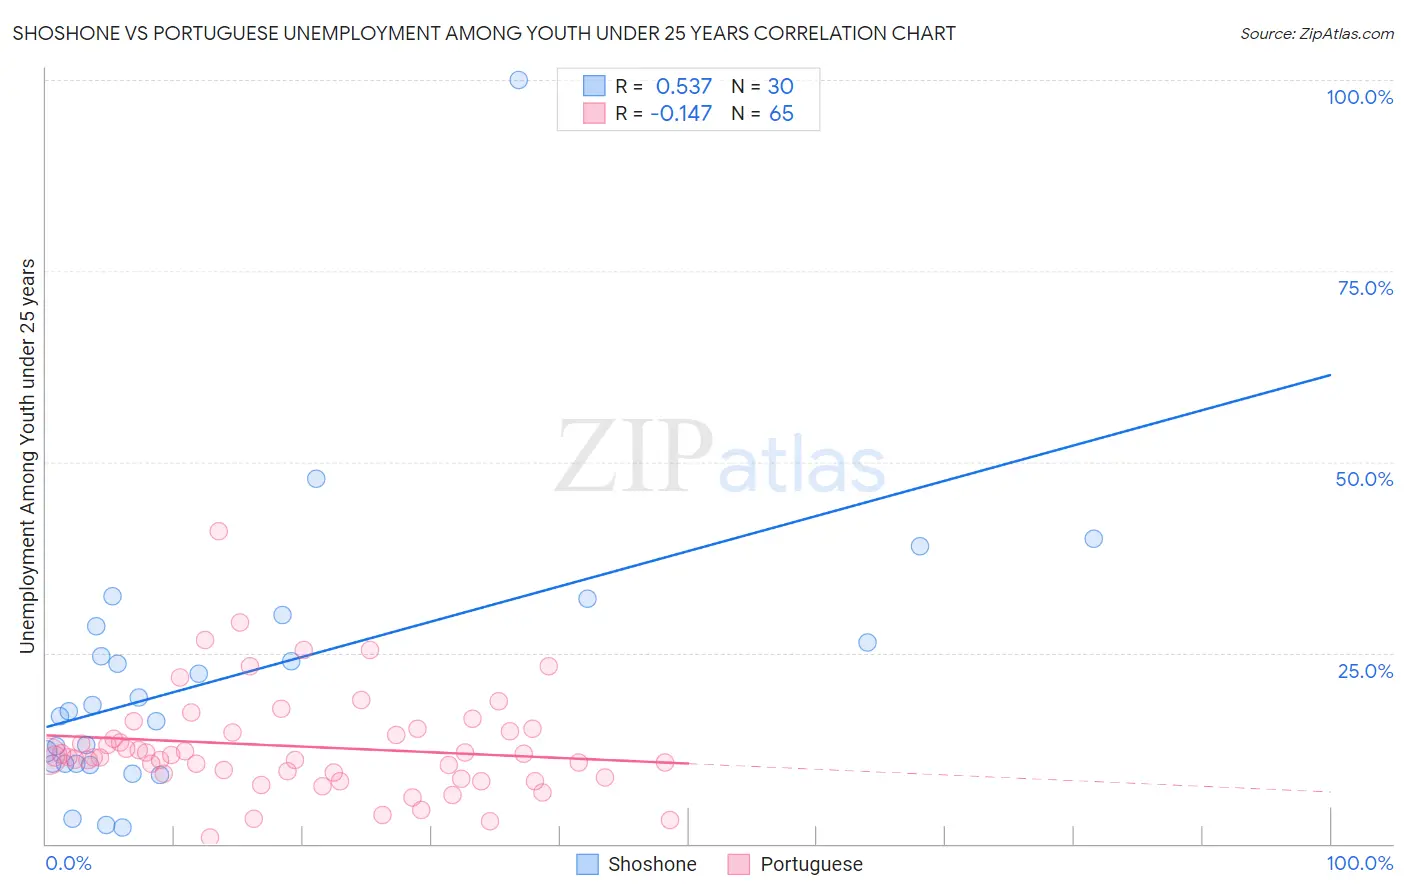 Shoshone vs Portuguese Unemployment Among Youth under 25 years